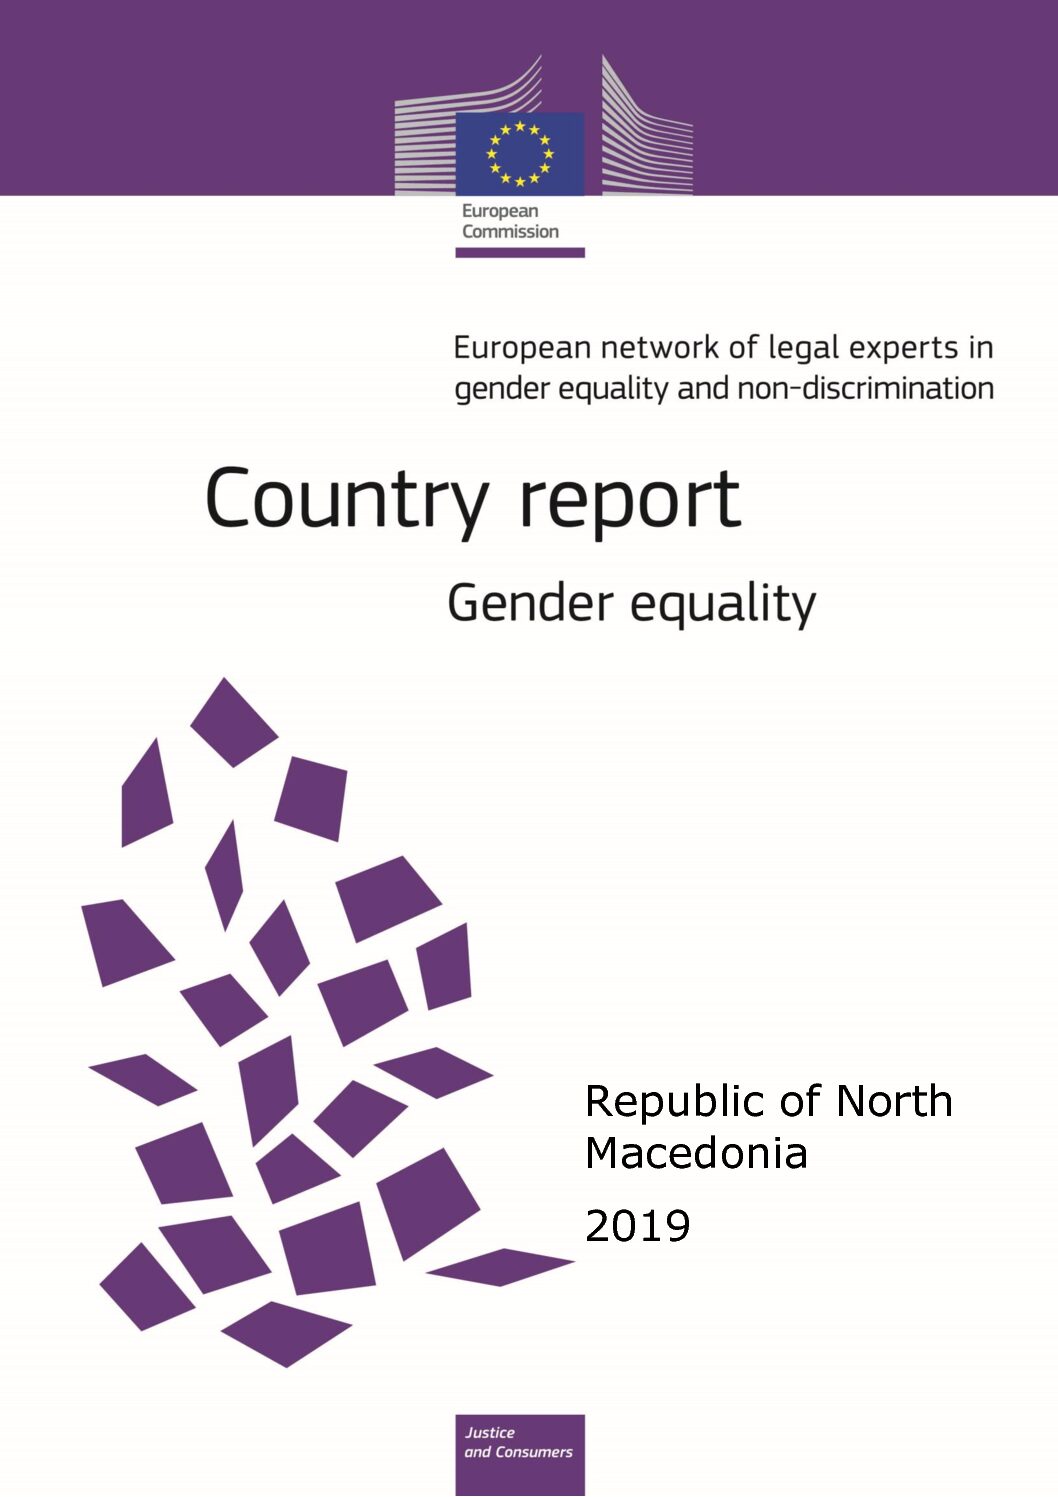 Republic of North Macedonia – Country report gender equality 2019